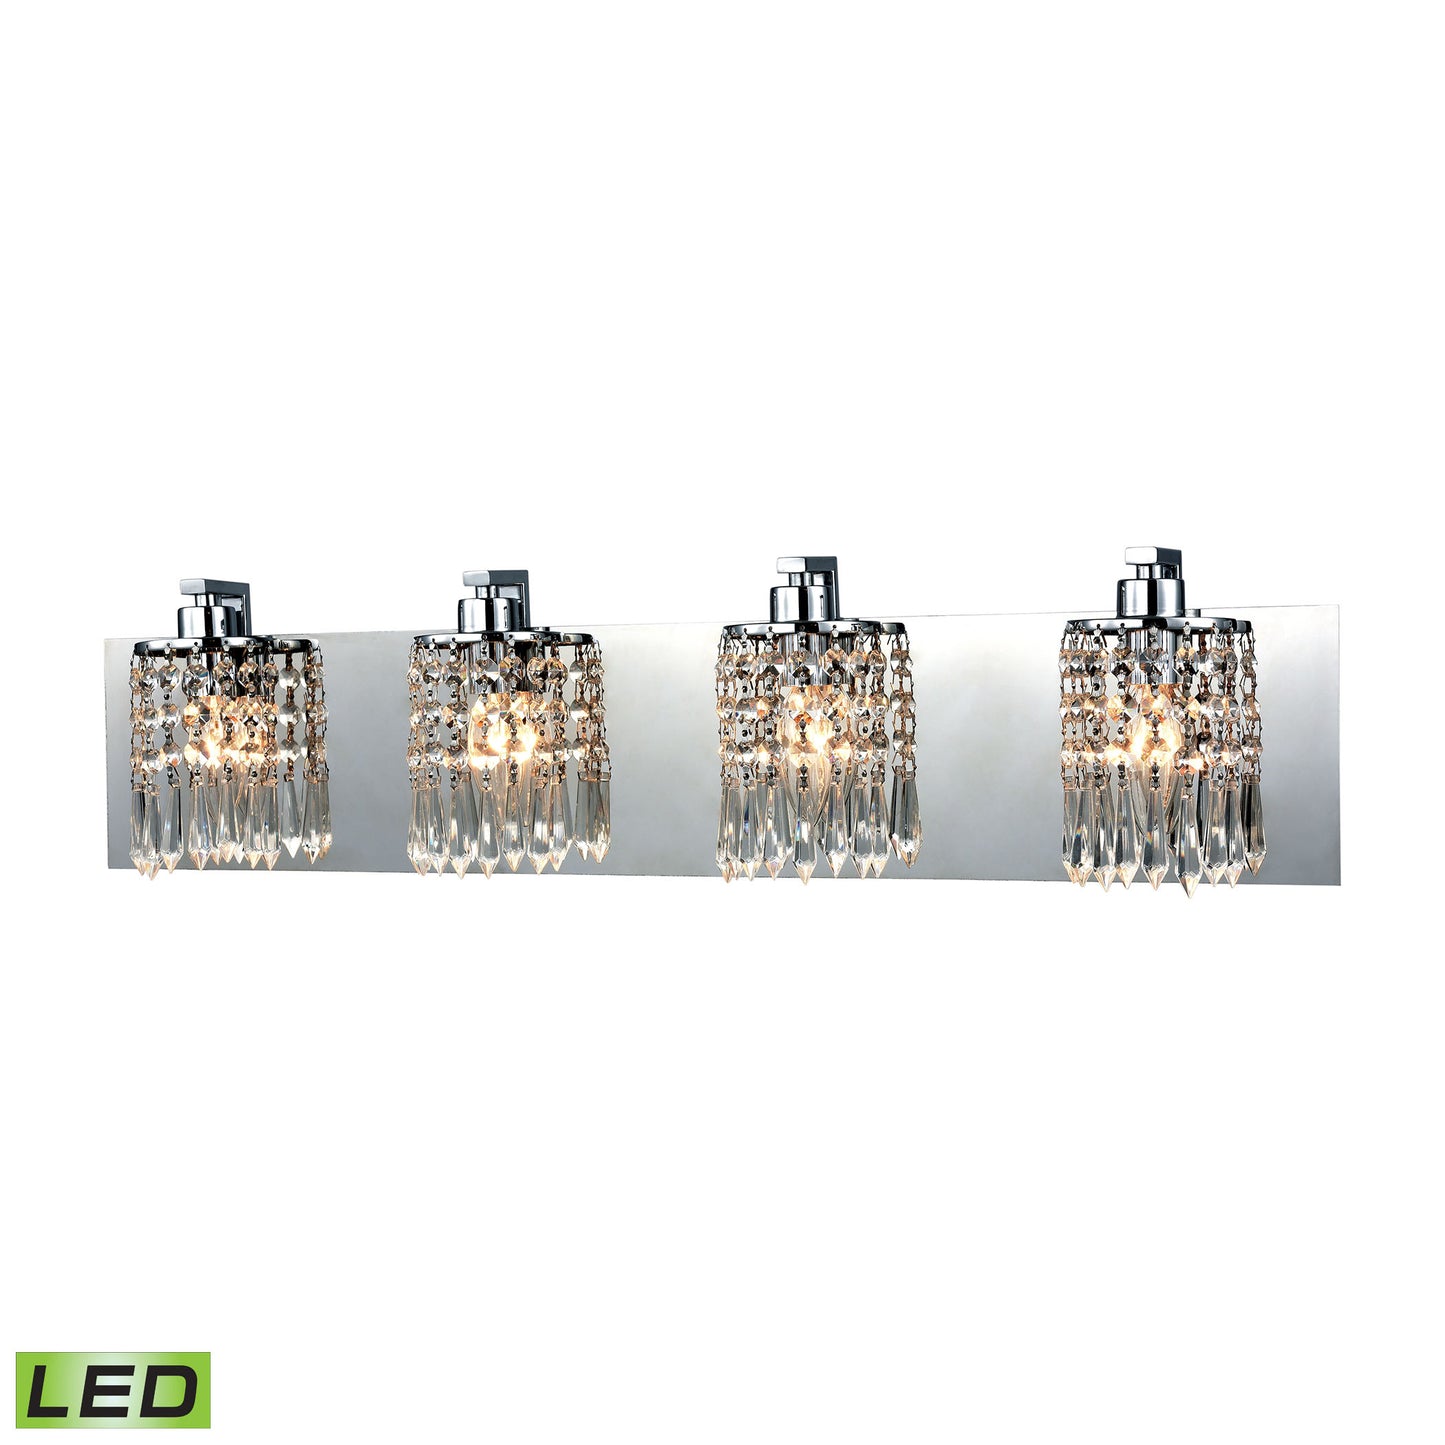 Optix 4-Light Vanity Sconce in Polished Chrome with Clear Crystal - Includes LED Bulbs